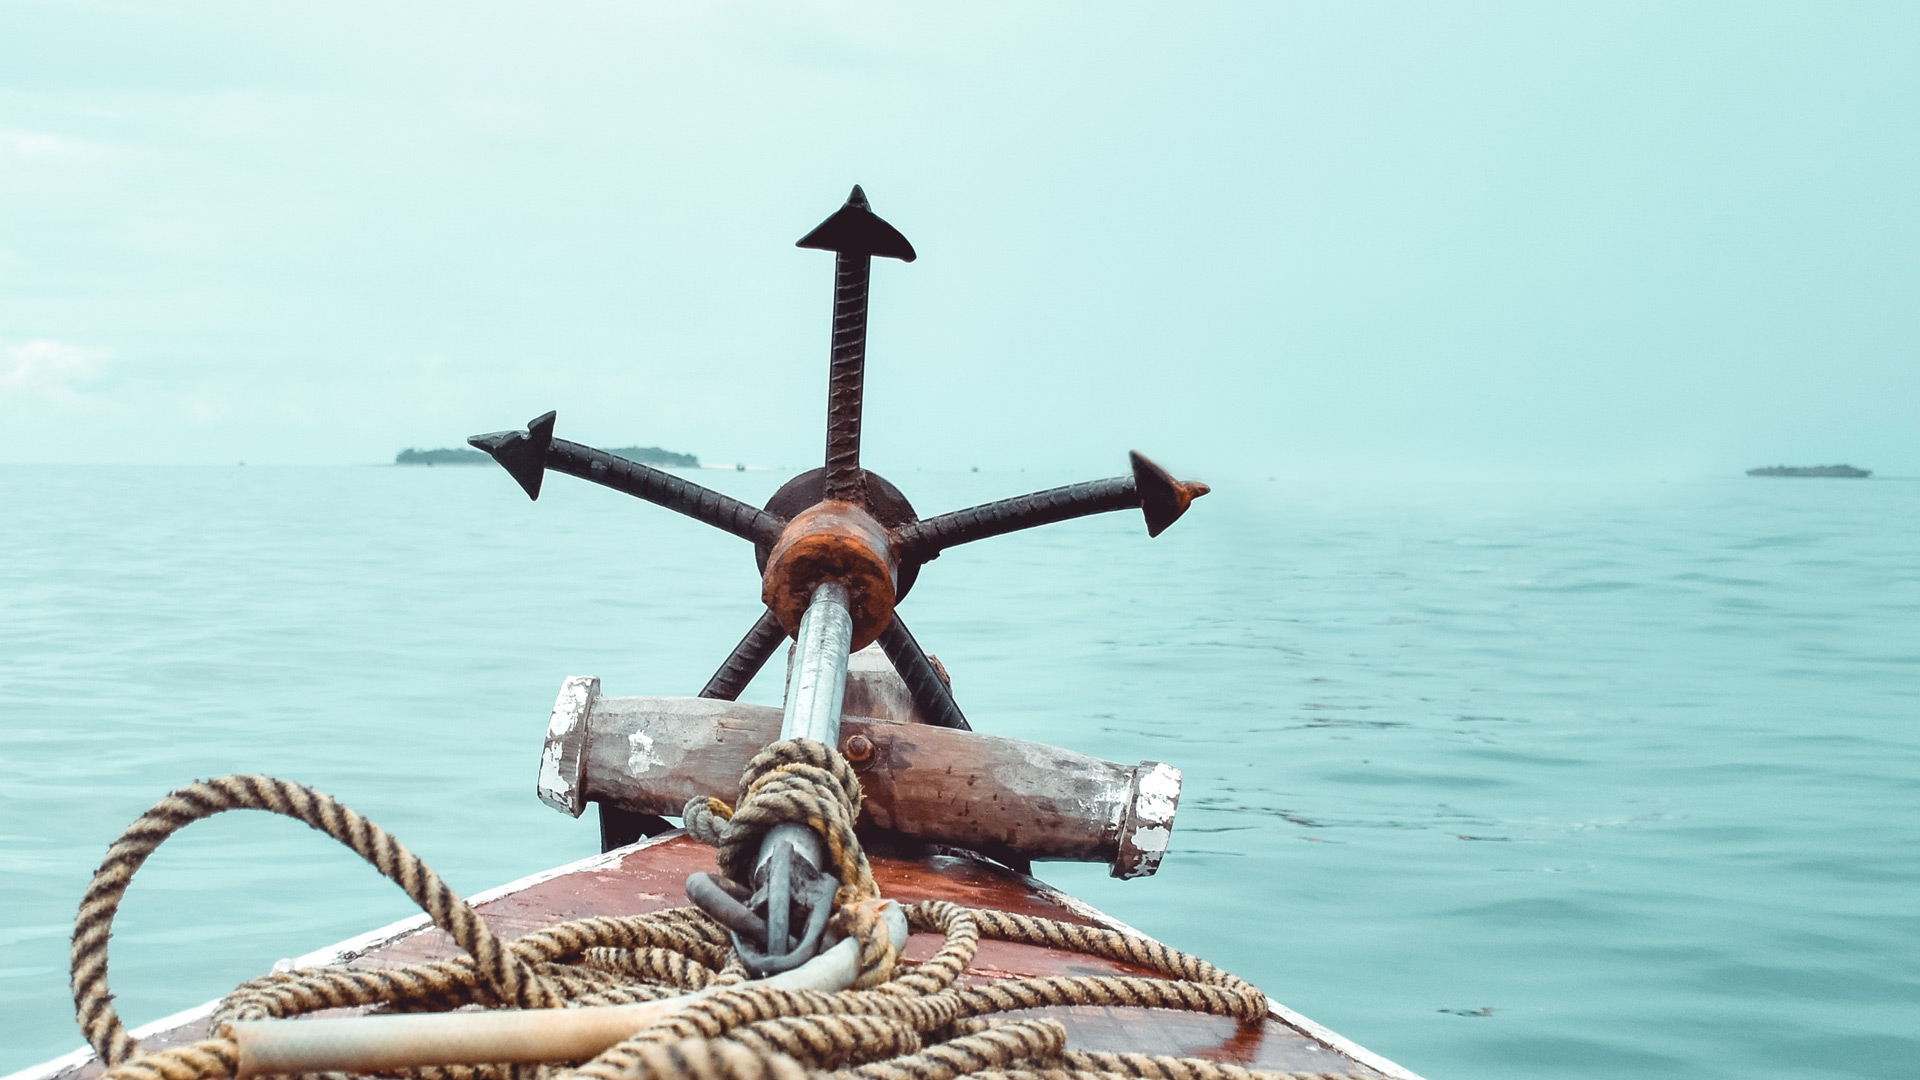 Anchor sits on the front of a boat ready for the journey (Nias Nyalada unsplash.com)